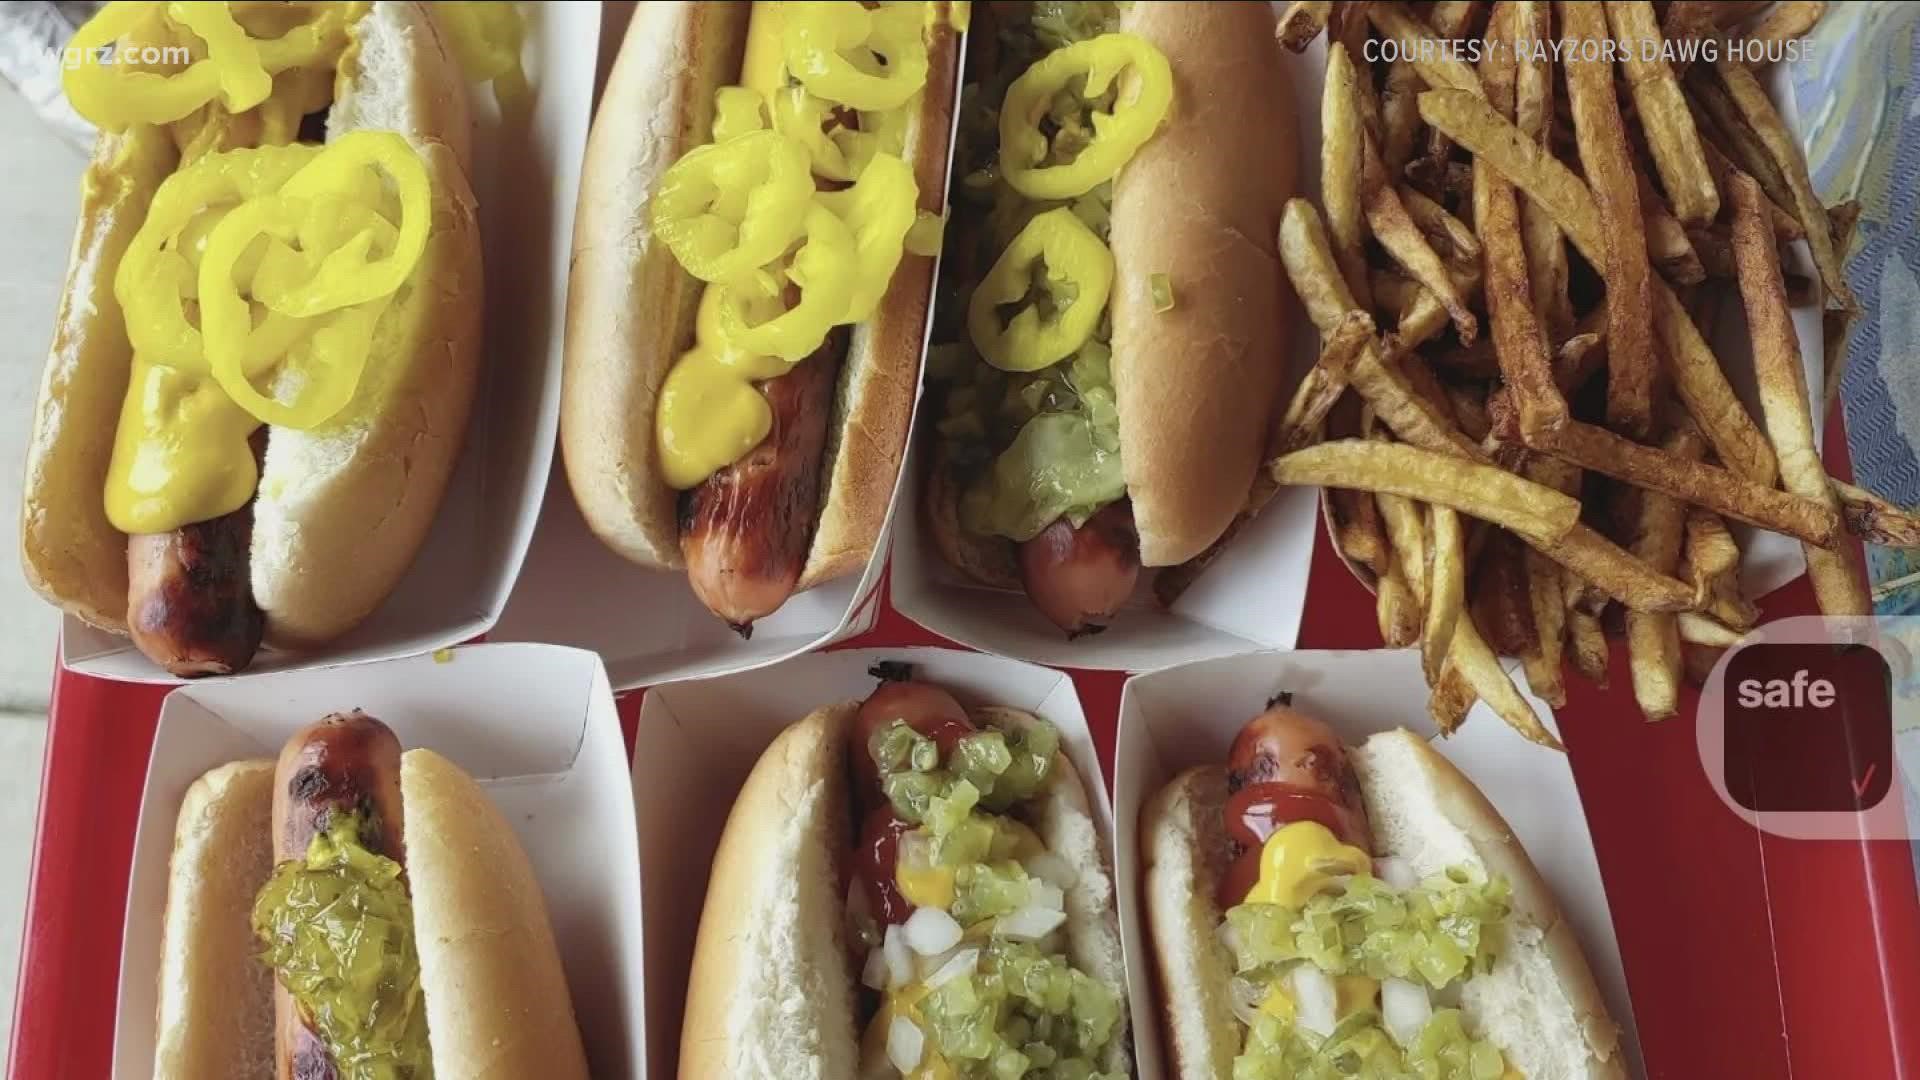 Rayzor's Dawg House in Eden will be giving out one free hot dog to every customer.